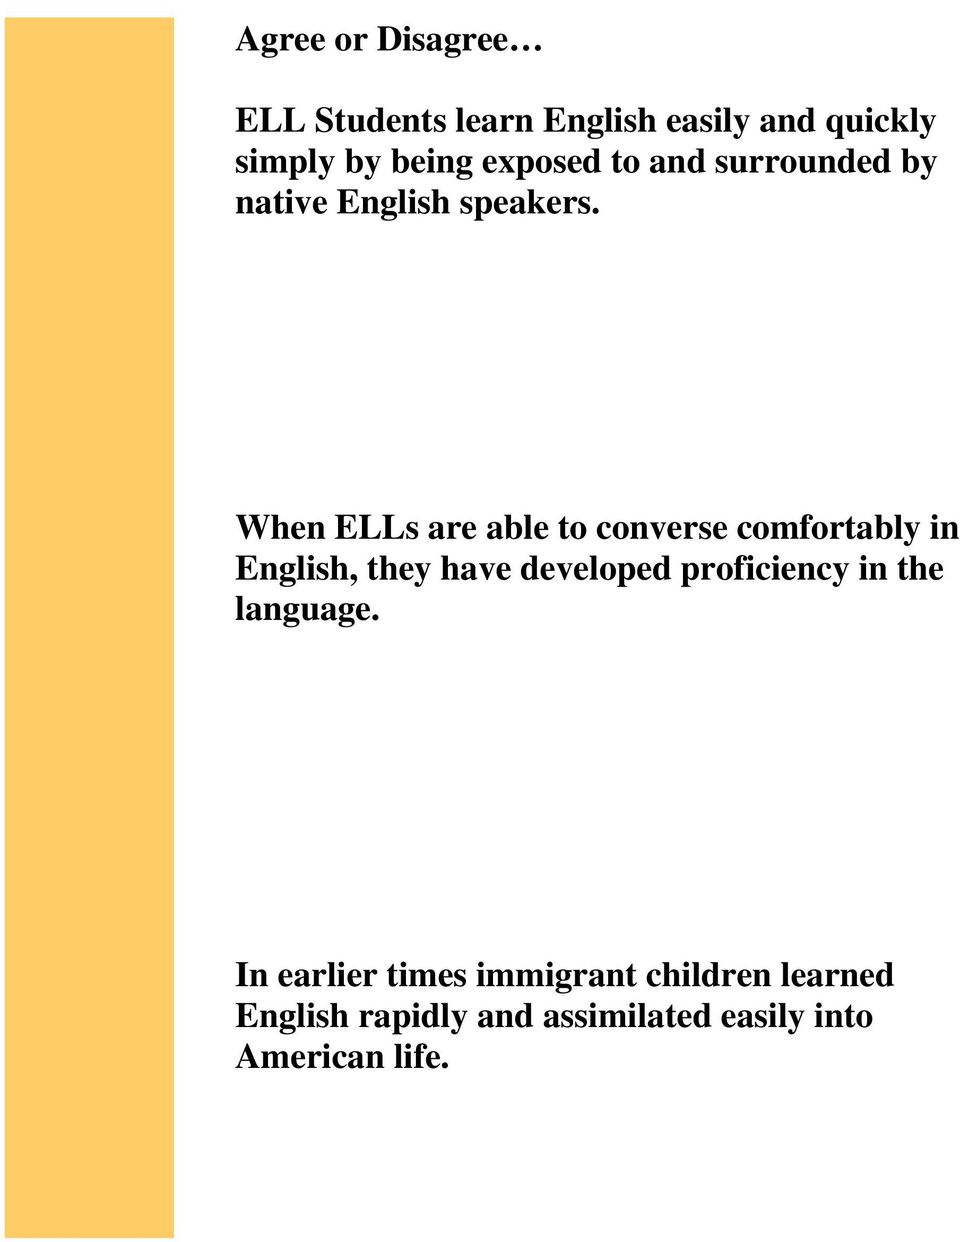 When ELLs are able to converse comfortably in English, they have developed